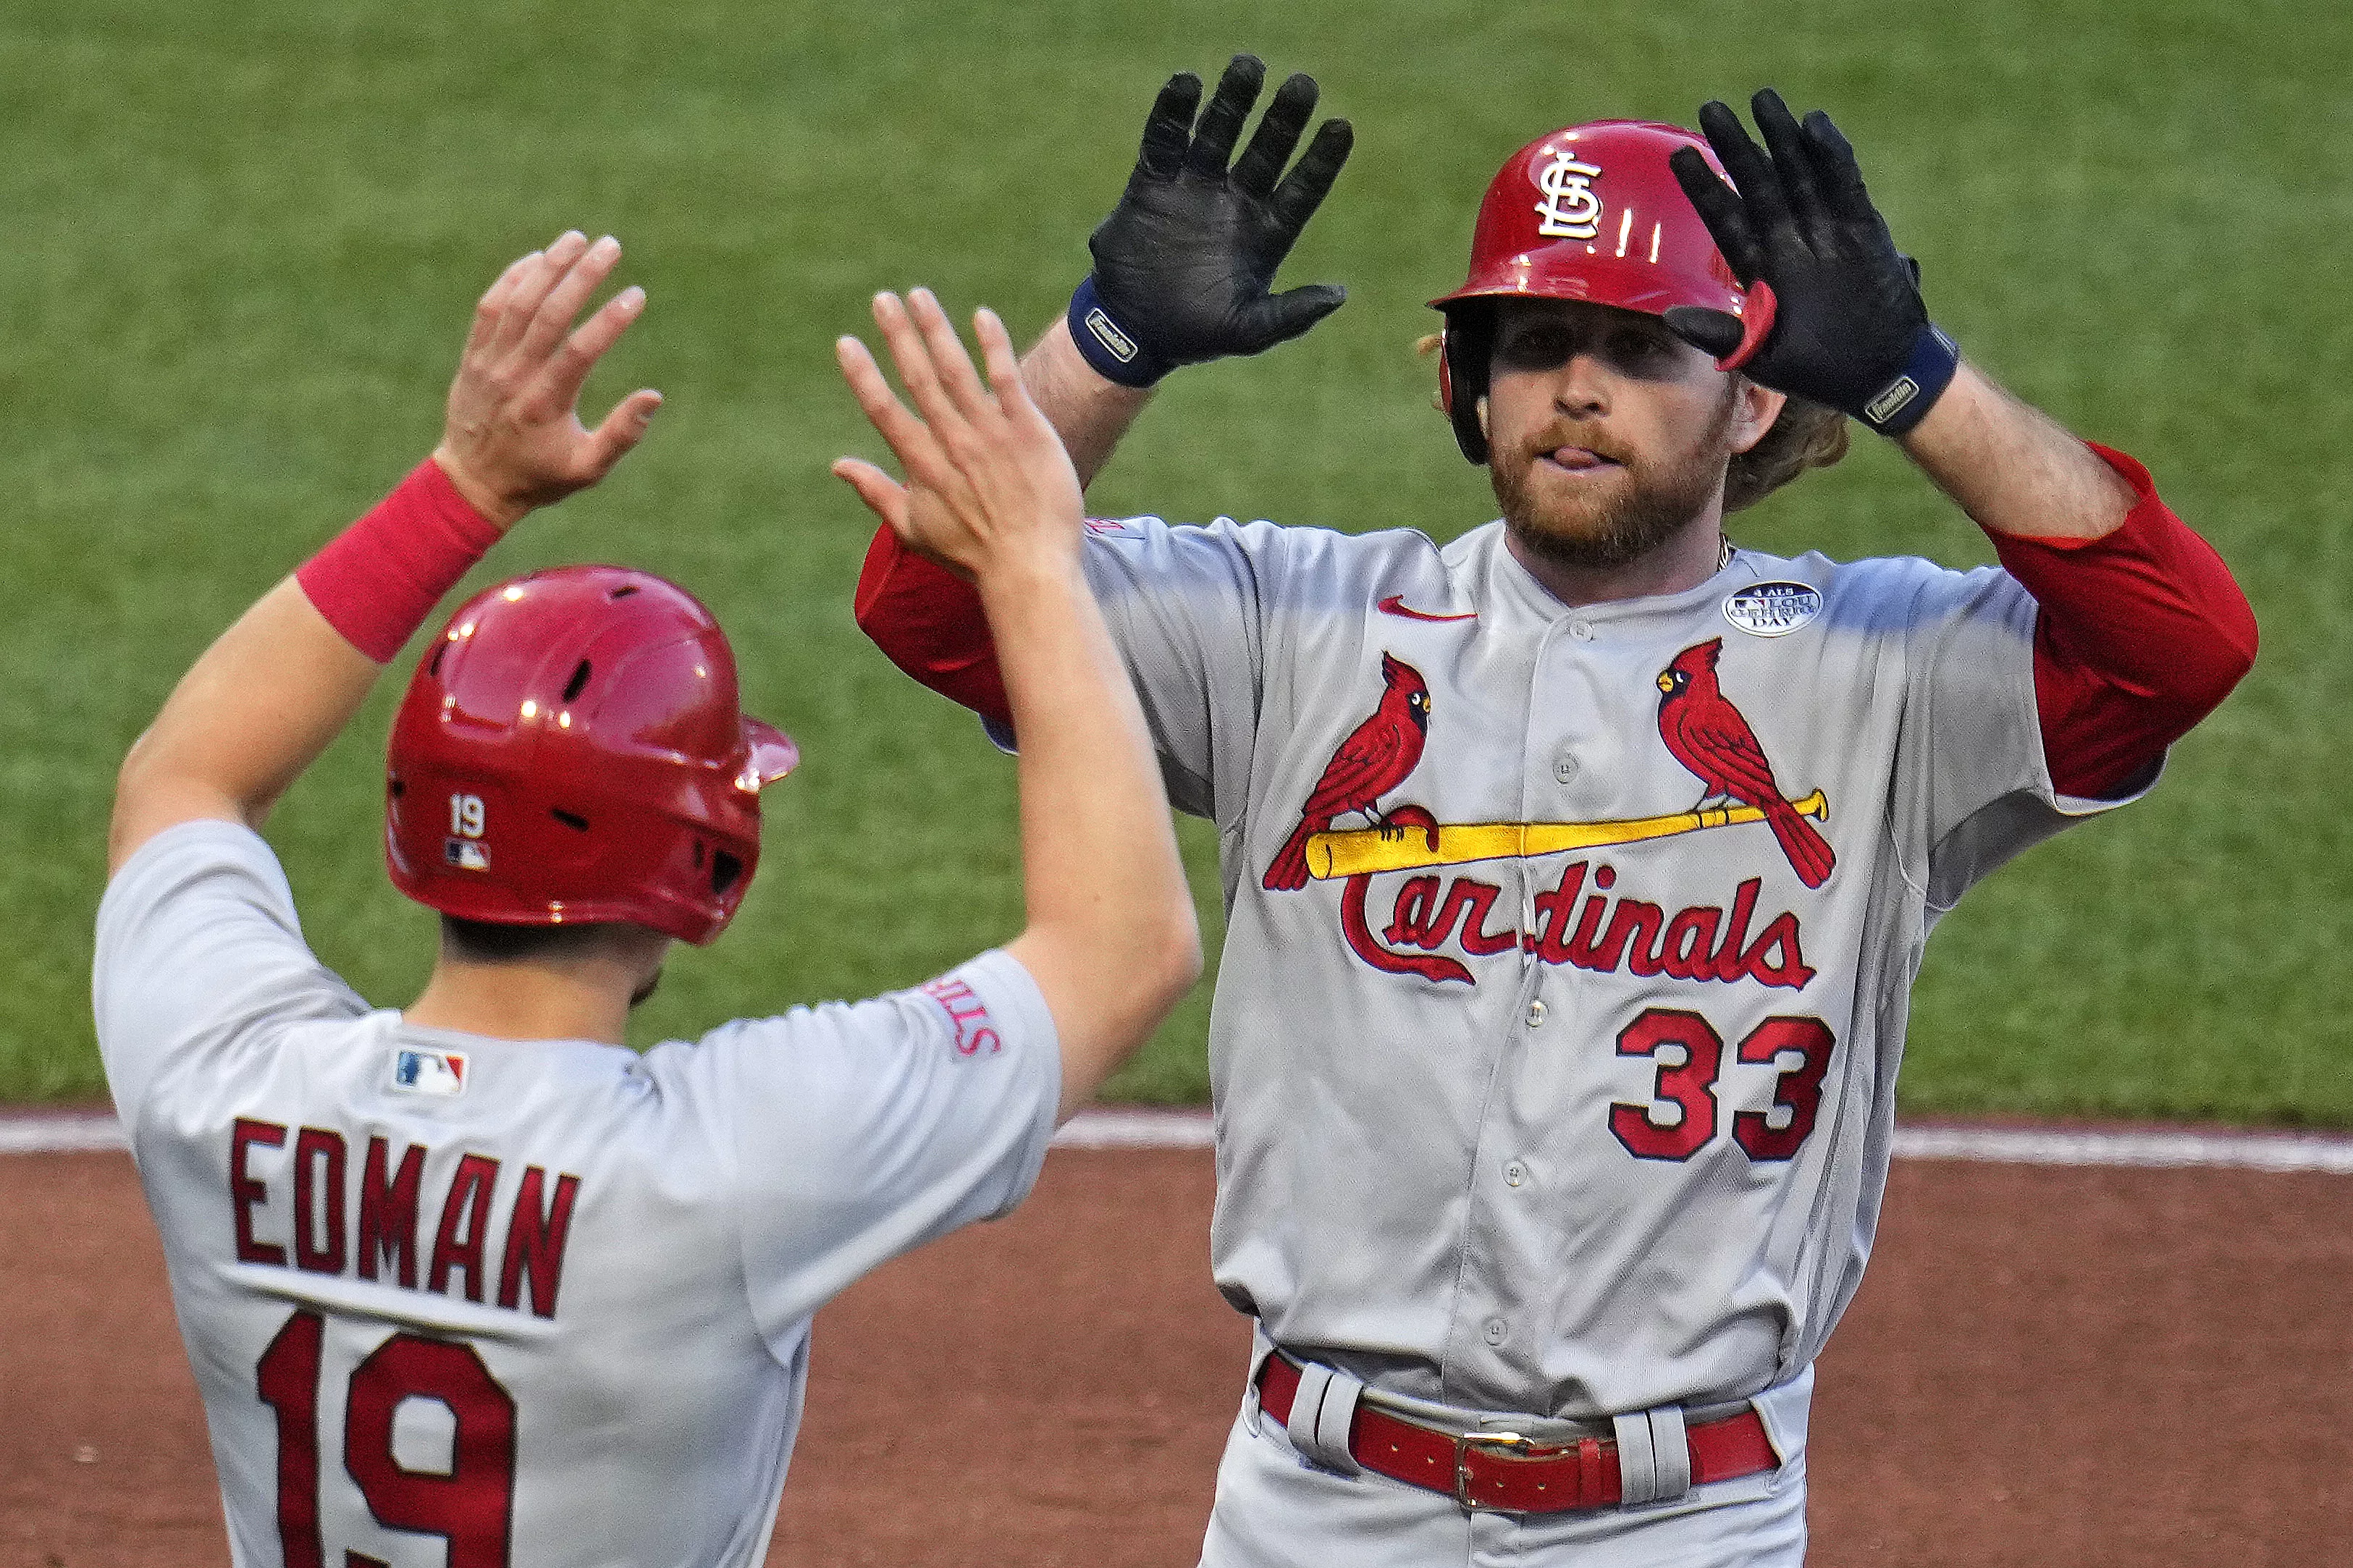 Wainwright wins No. 198, Goldschmidt homers as the Cardinals beat the Mets  5-3 to stop their slide